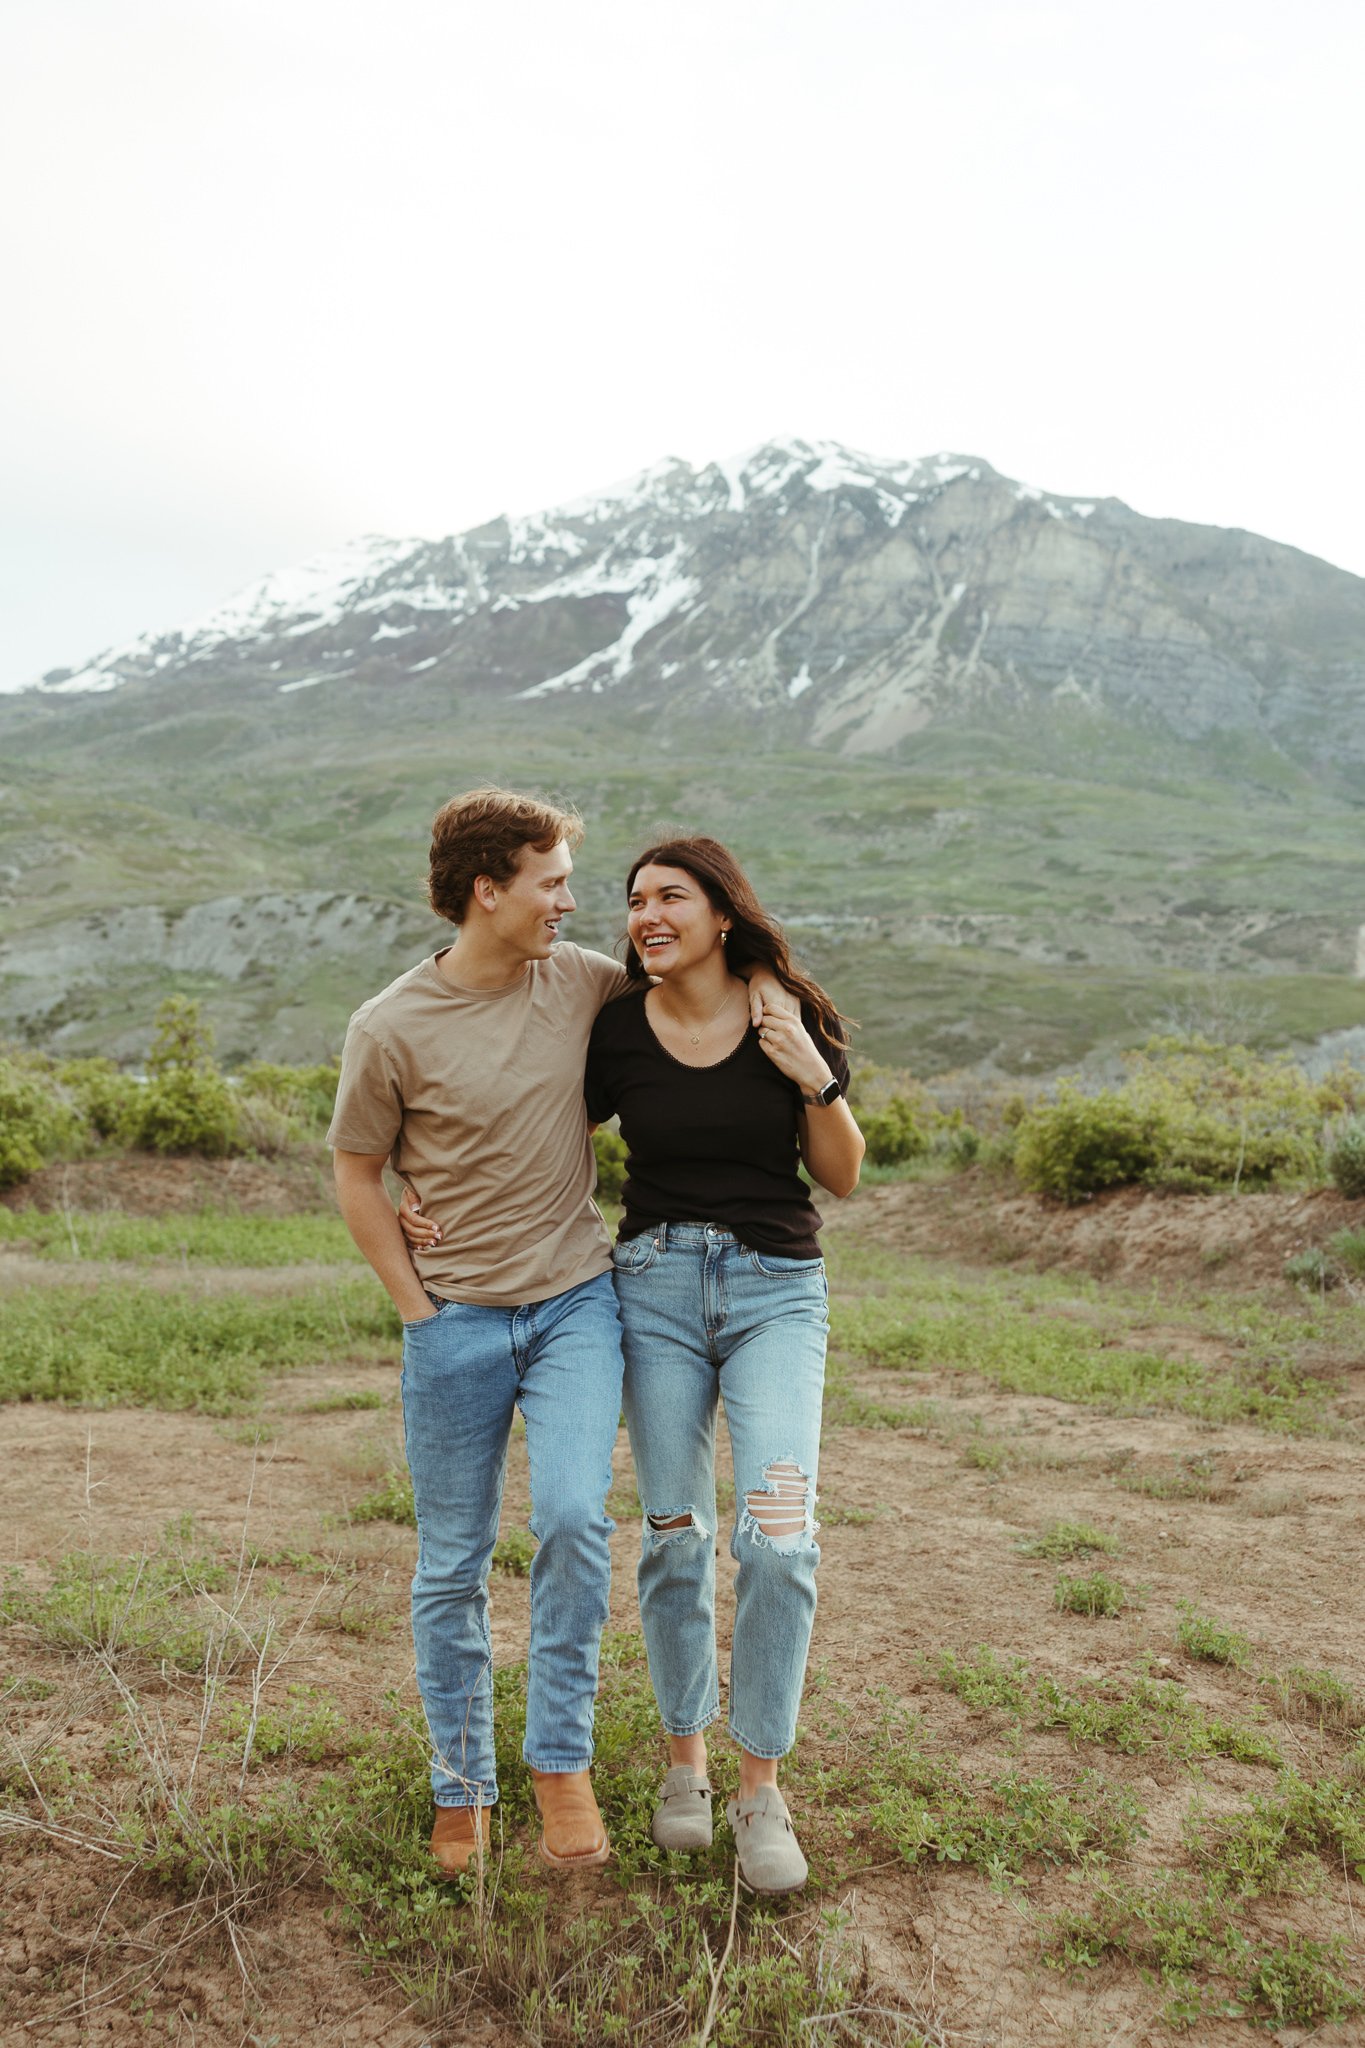 Spring-Provo-Canyon-Wildflowers-Engagement-Session-1